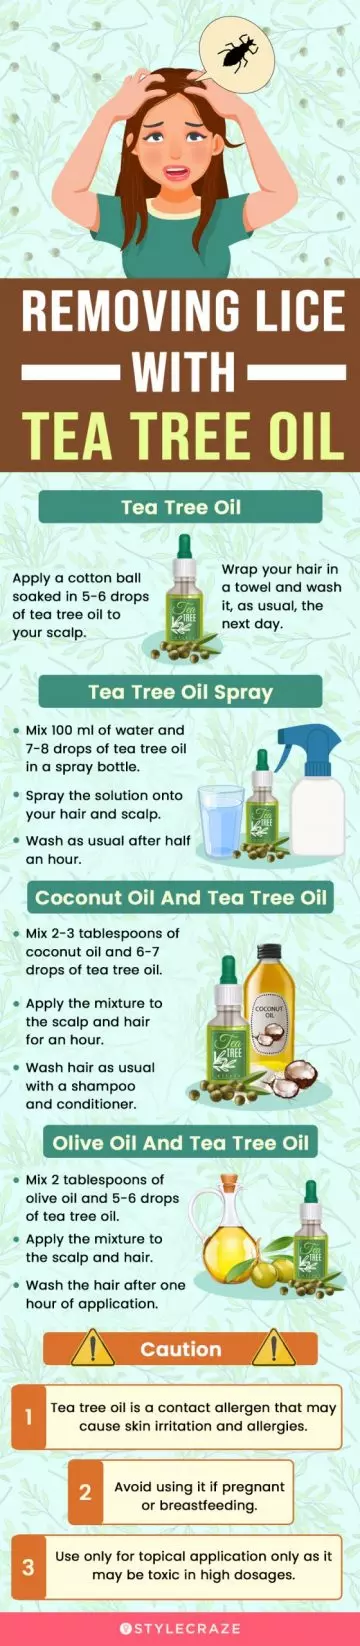 removing lice with tea tree oil (infographic)